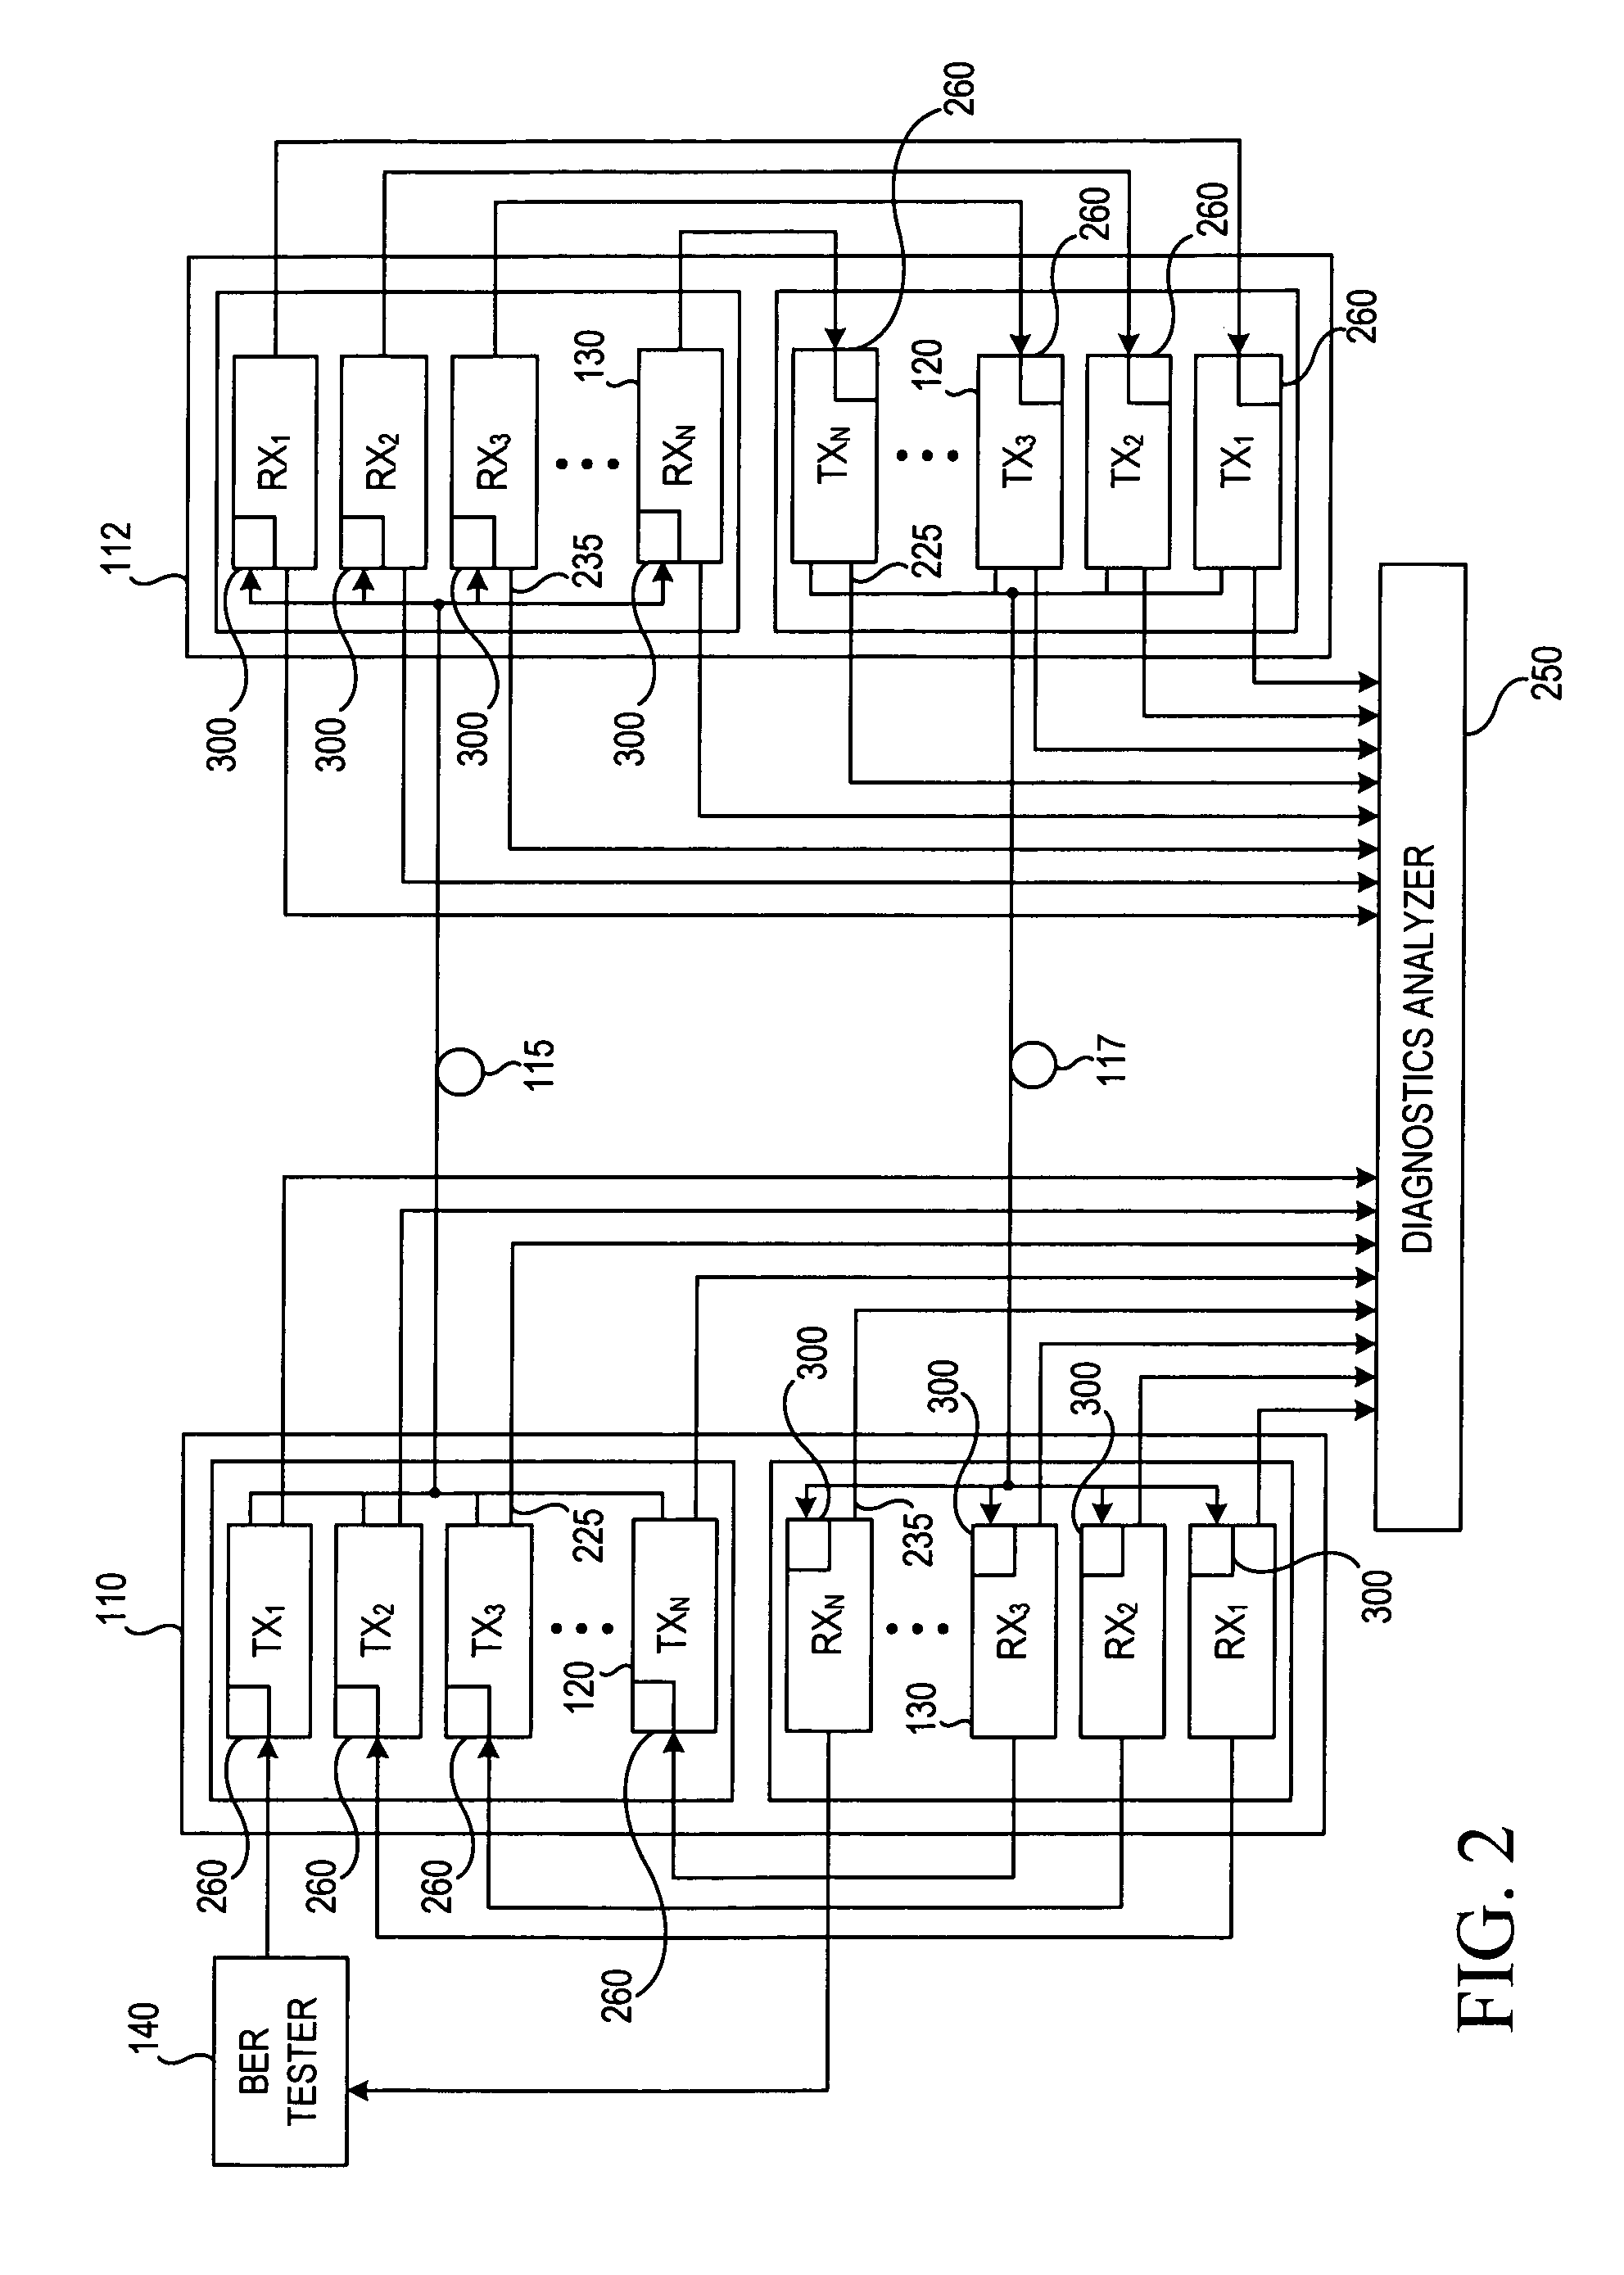 Method of testing bit error rates for a wavelength division multiplexed optical communication system